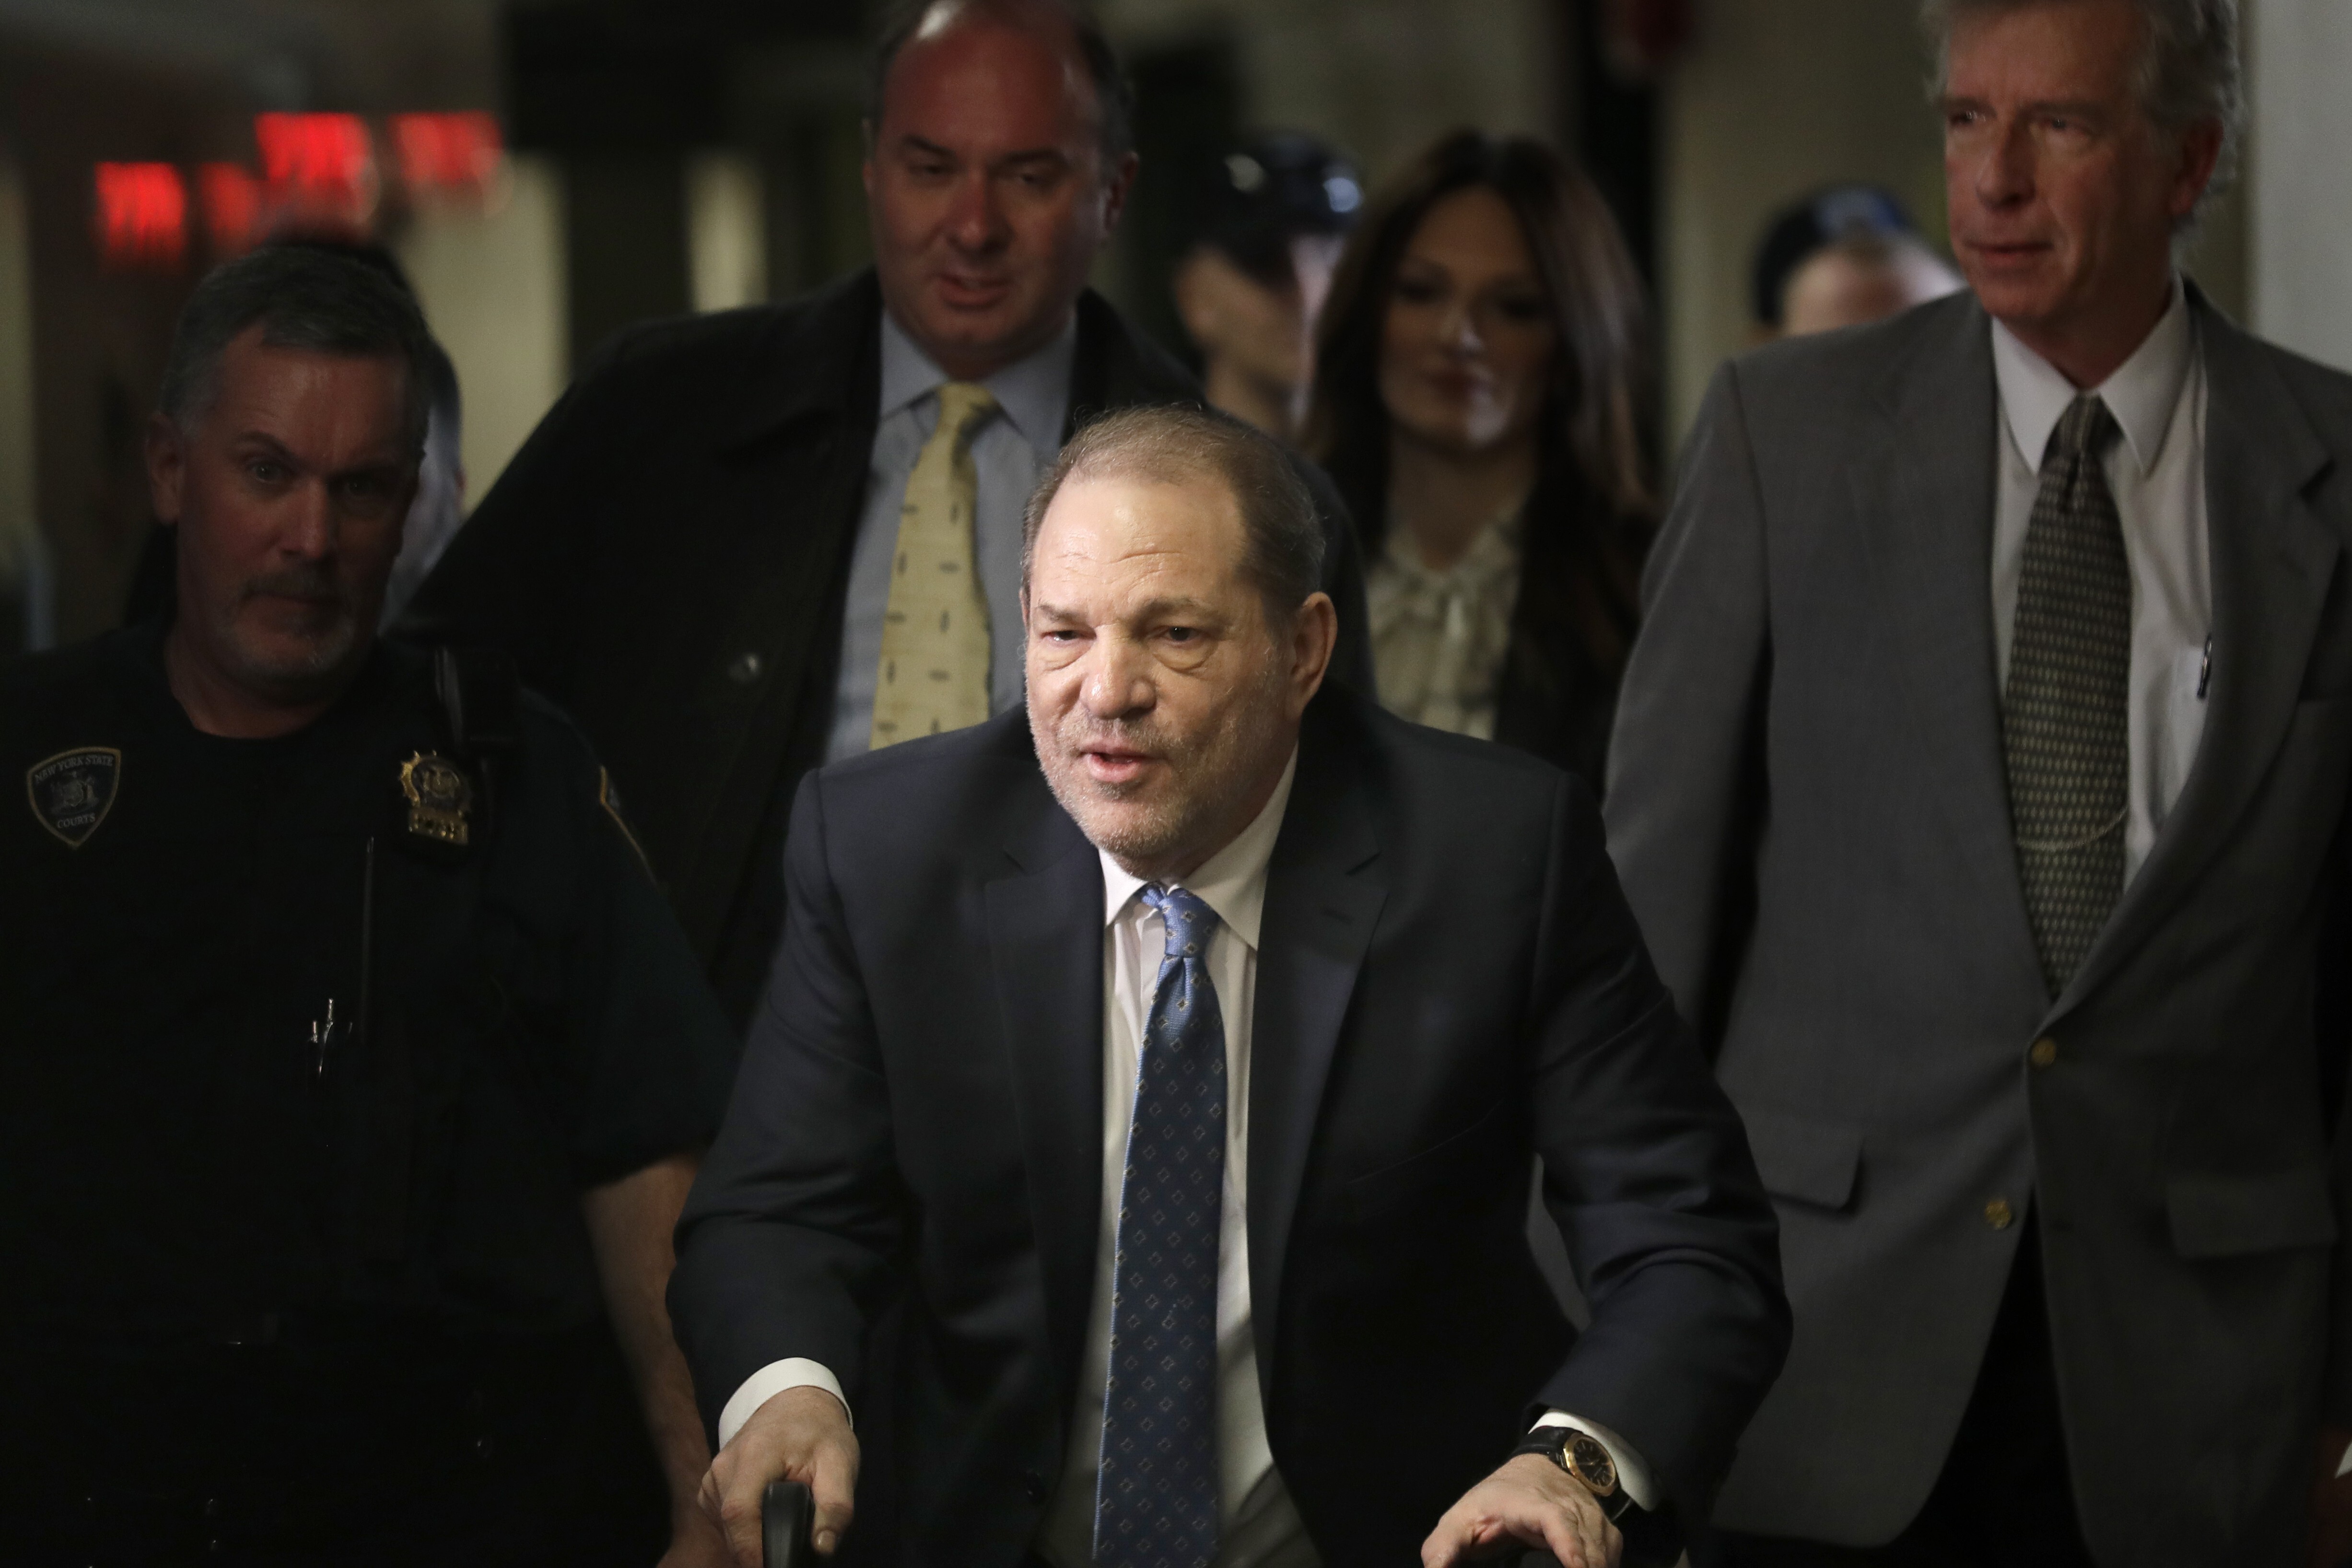 Harvey Weinstein arrives at a Manhattan courthouse for jury deliberations in his rape trial in New York earlier this year. Accusations by dozens of women in 2017 led to the end of his career and helped spur the #MeToo movement. Photo: AP Photo